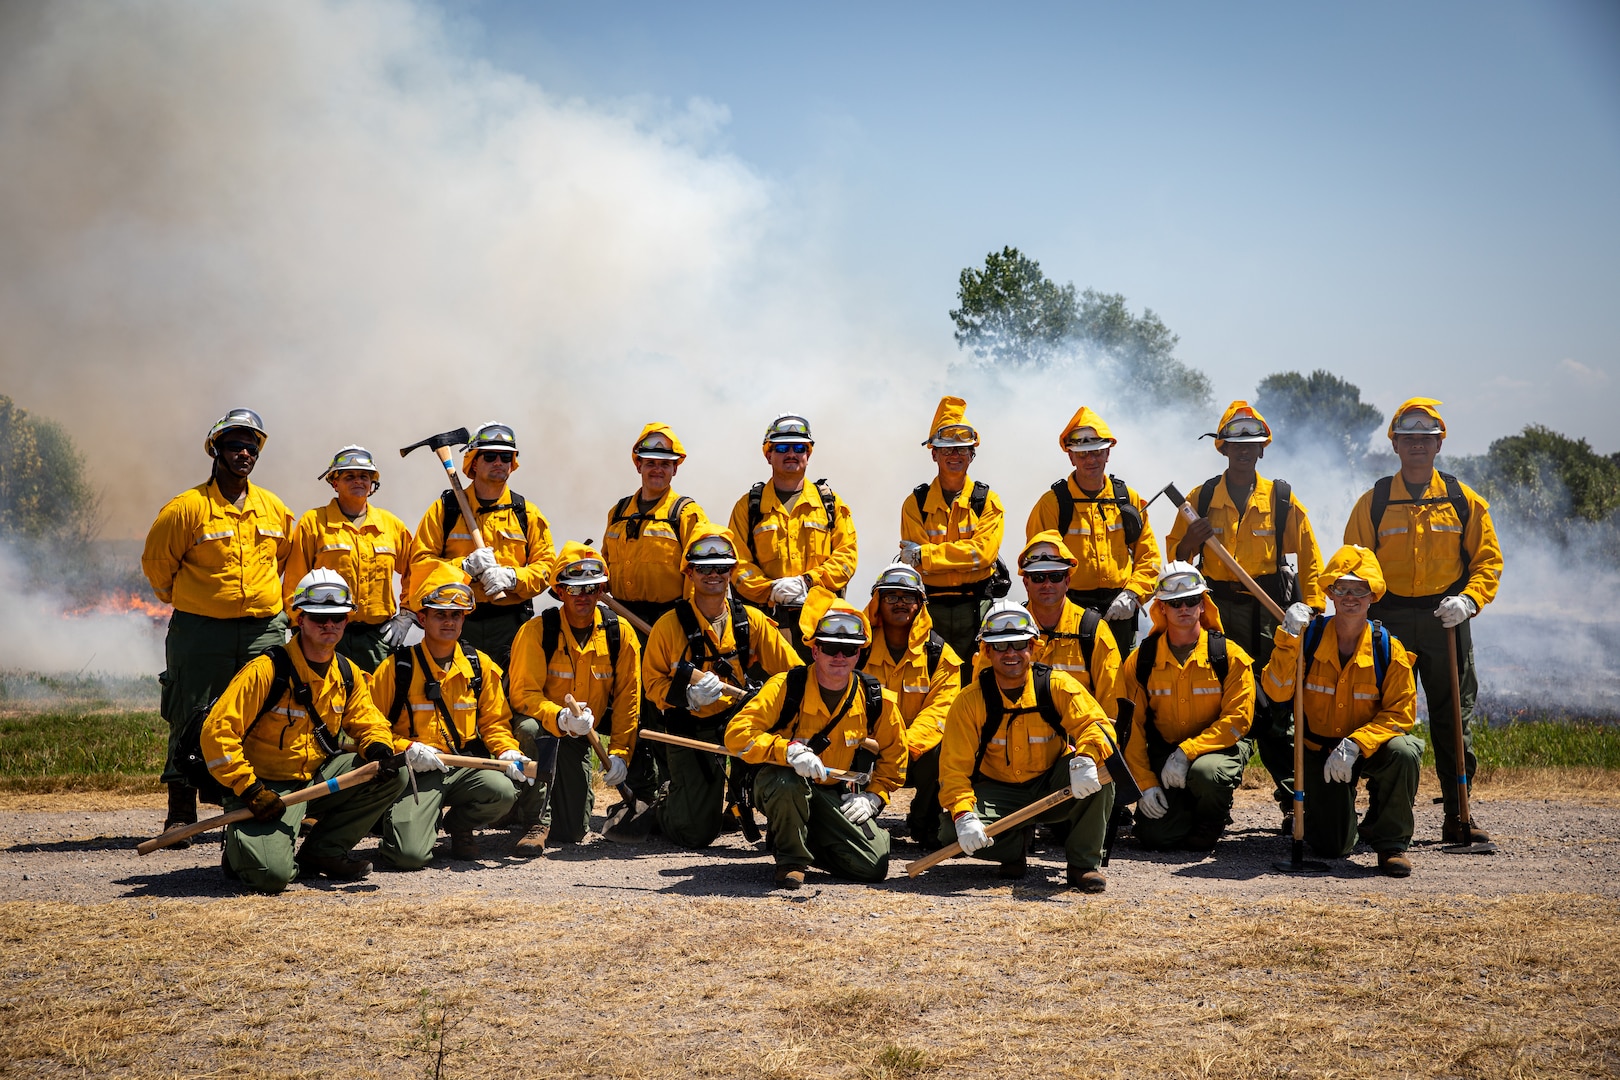 Oklahoma Army National Guard Soldiers pose for a photo at the Wildland Firefighting Course at Camp Gruber Training Center, Oklahoma, Aug. 21, 2023. Soldiers volunteered for the course to earn their Red Card Certification and have the knowledge and experience to respond to wildfire incidents both in state and around the nation. (Oklahoma Army National Guard photo by Spc. Danielle Rayon)